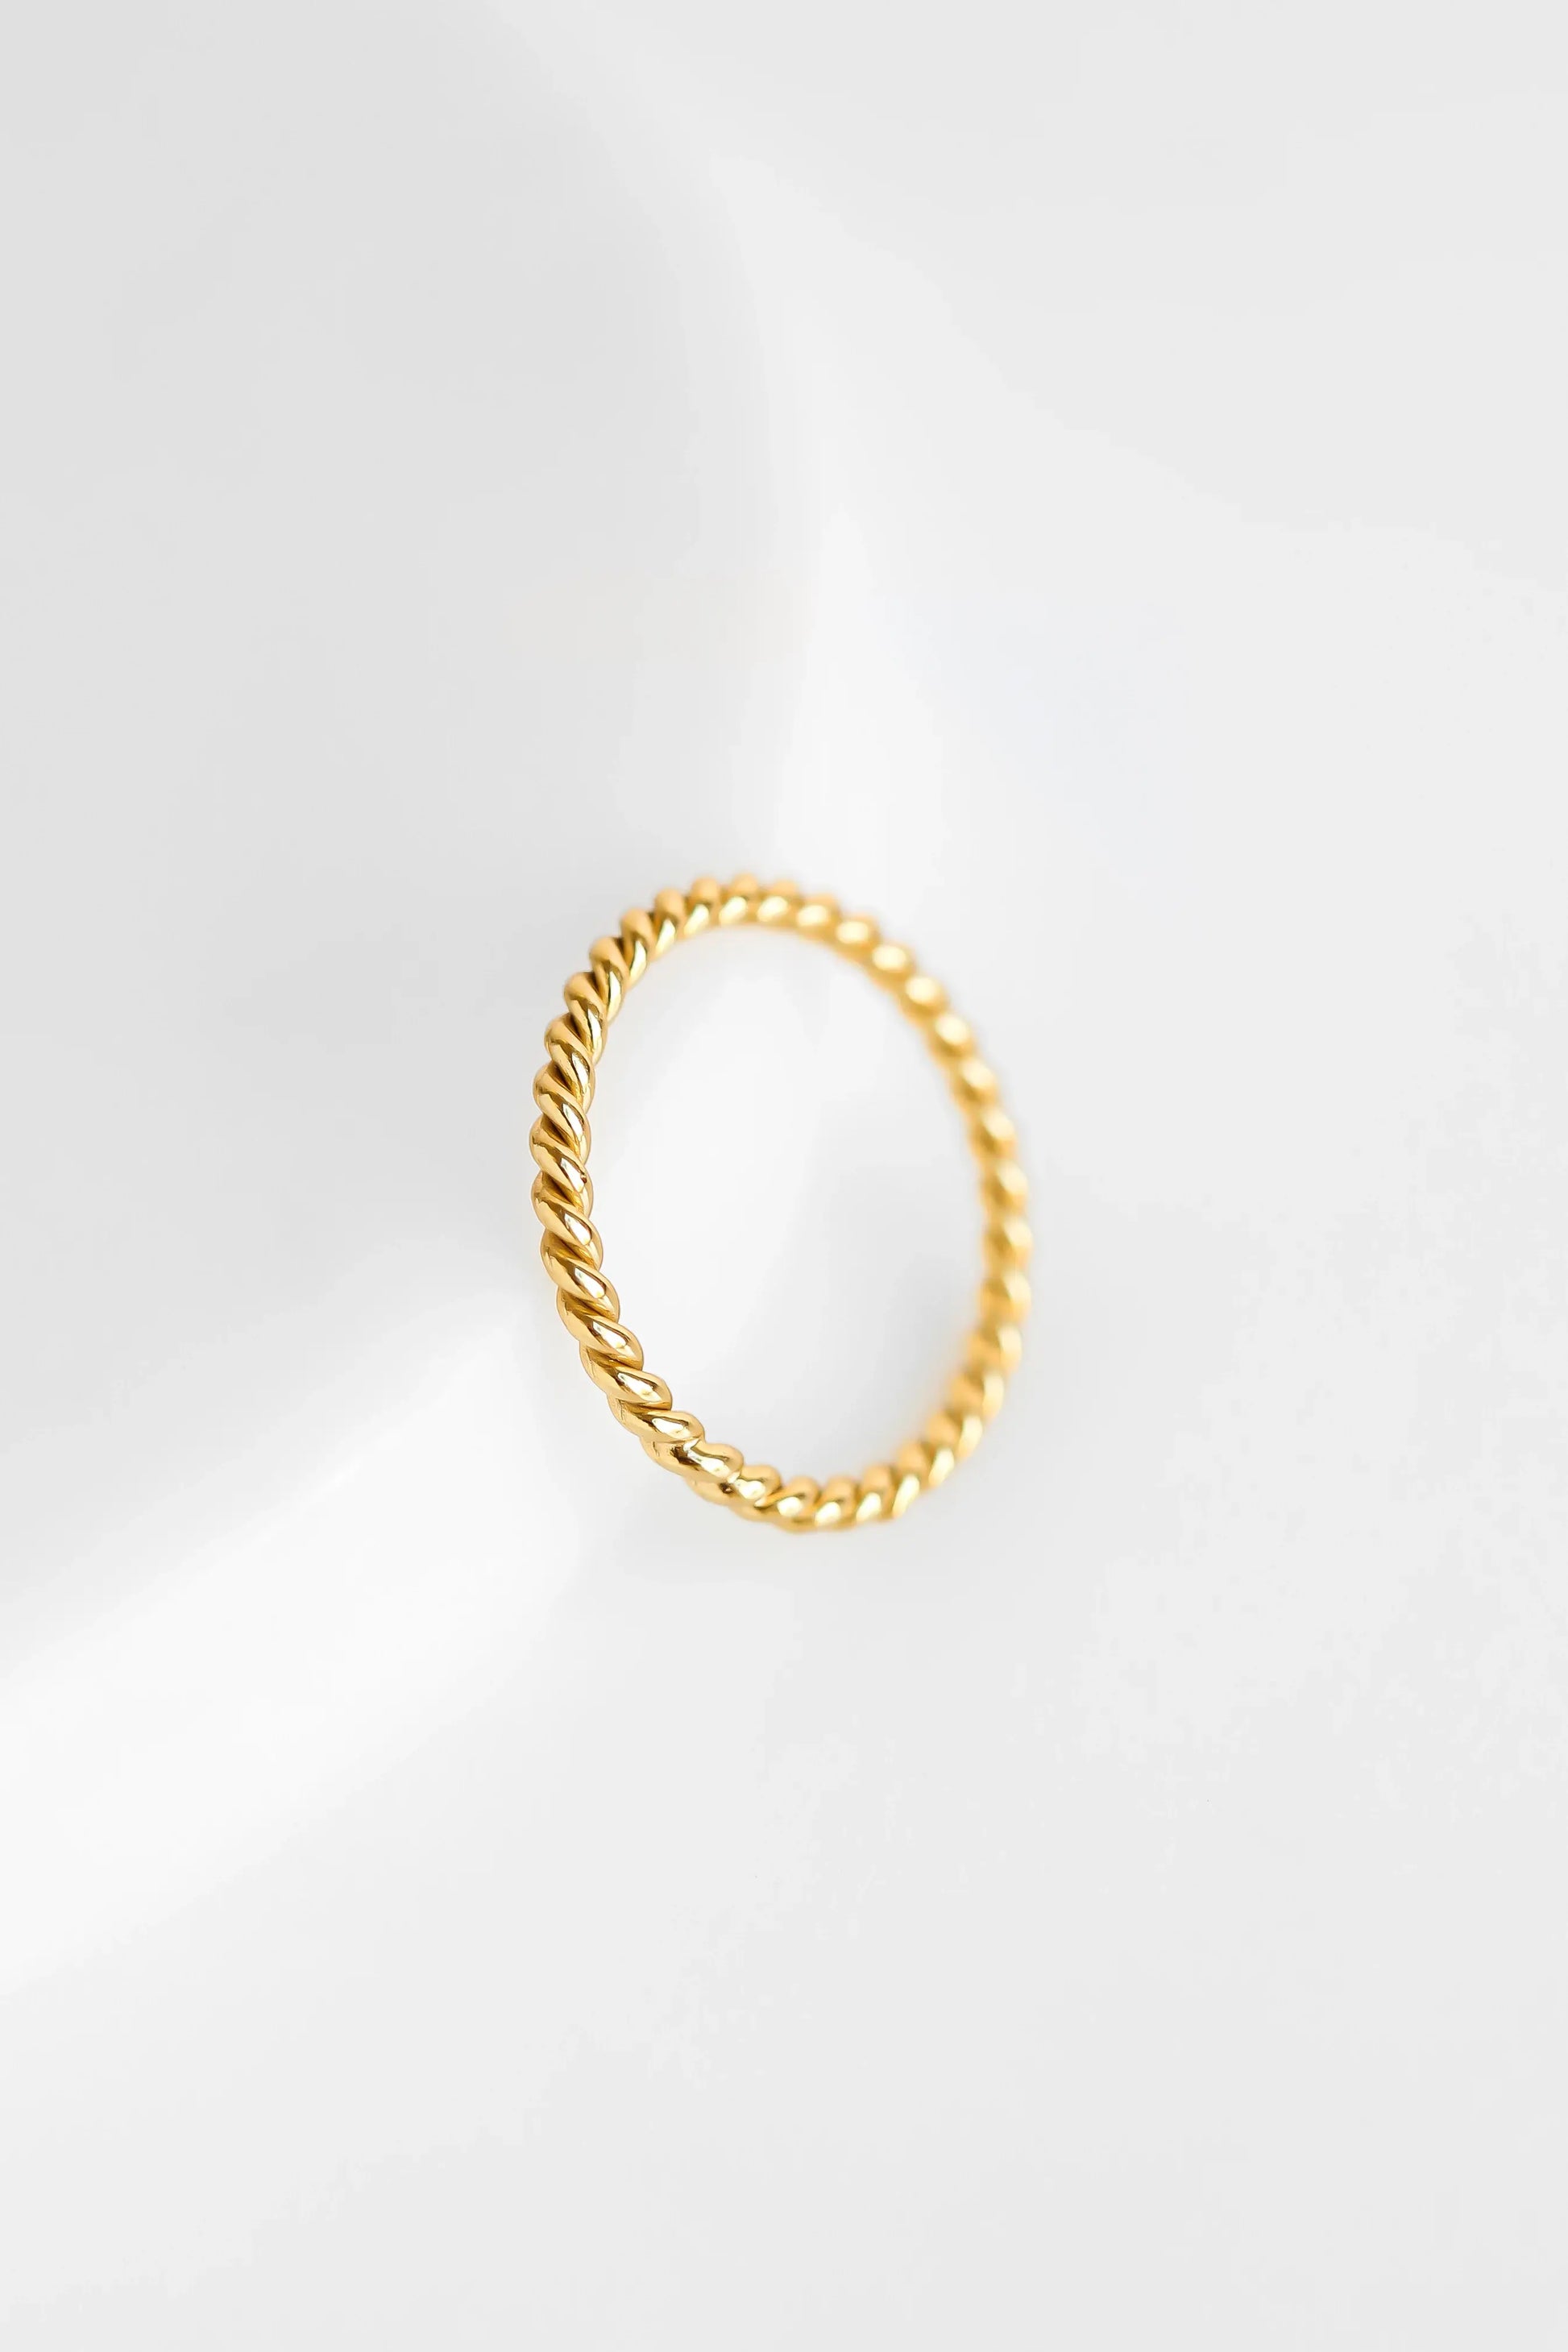 The    Finley Ring by  Francesca Jewellery from the Rings Collection.